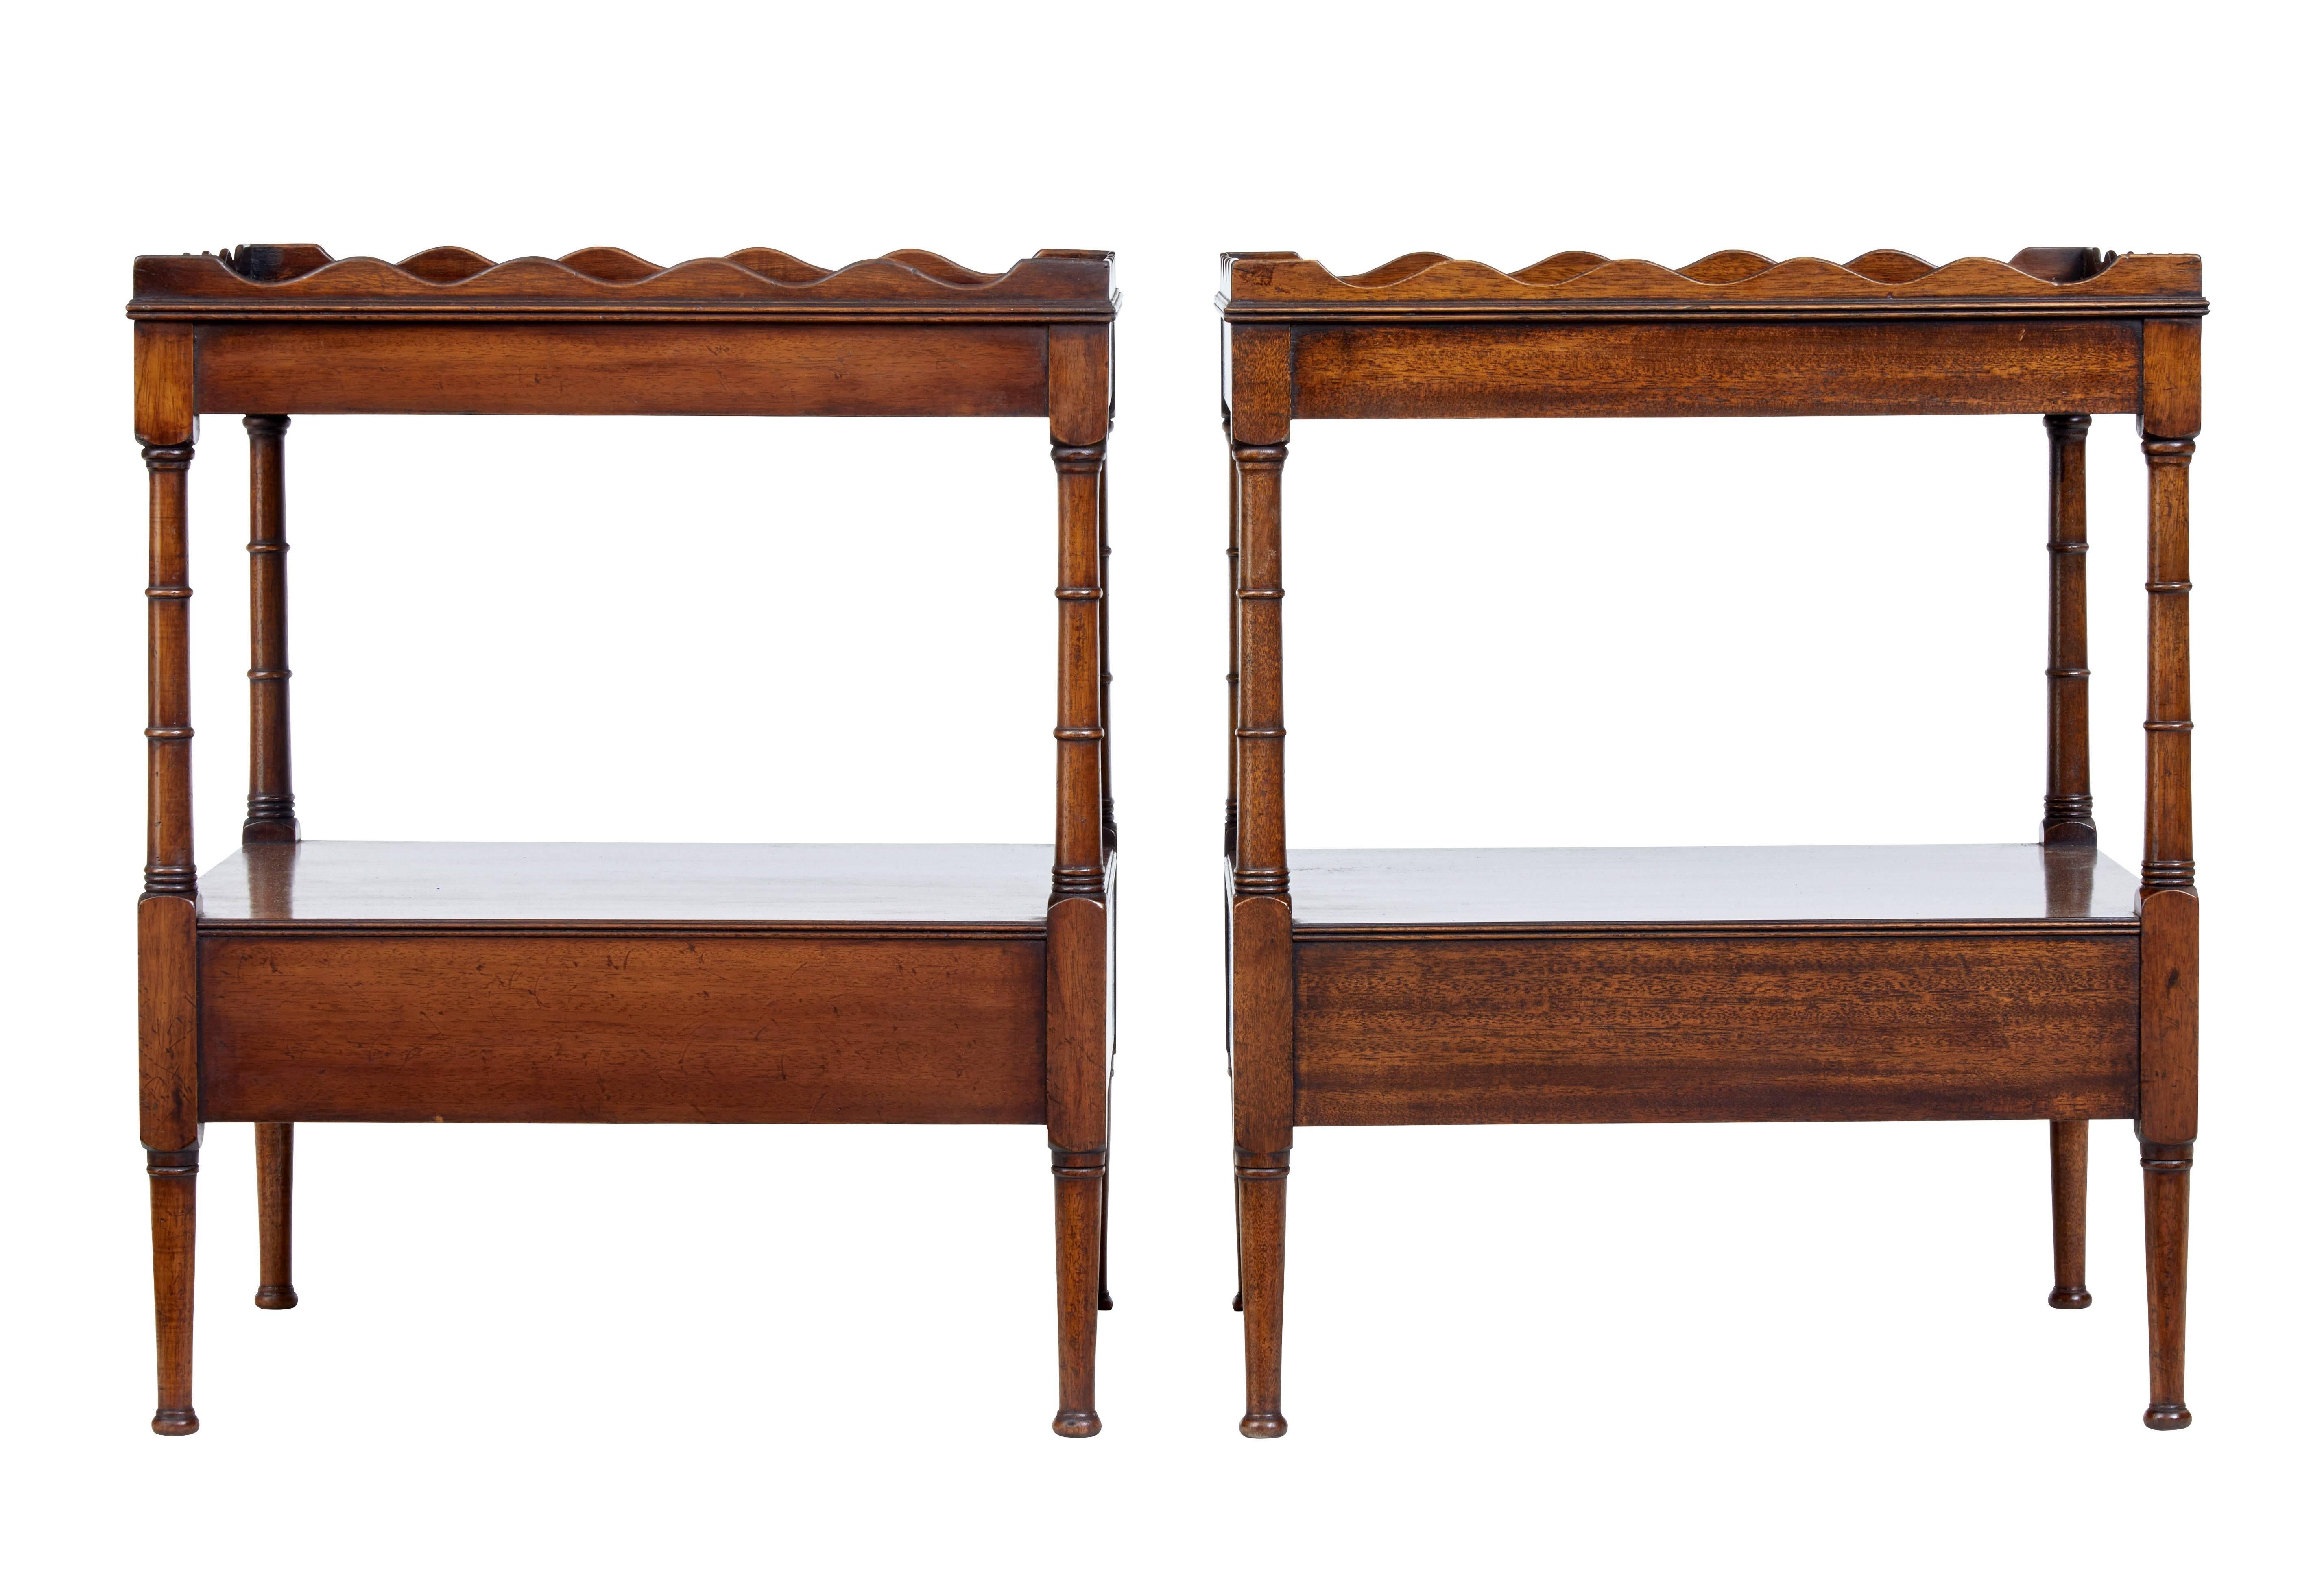 British Pair of Mahogany Bedside Tables with Slides